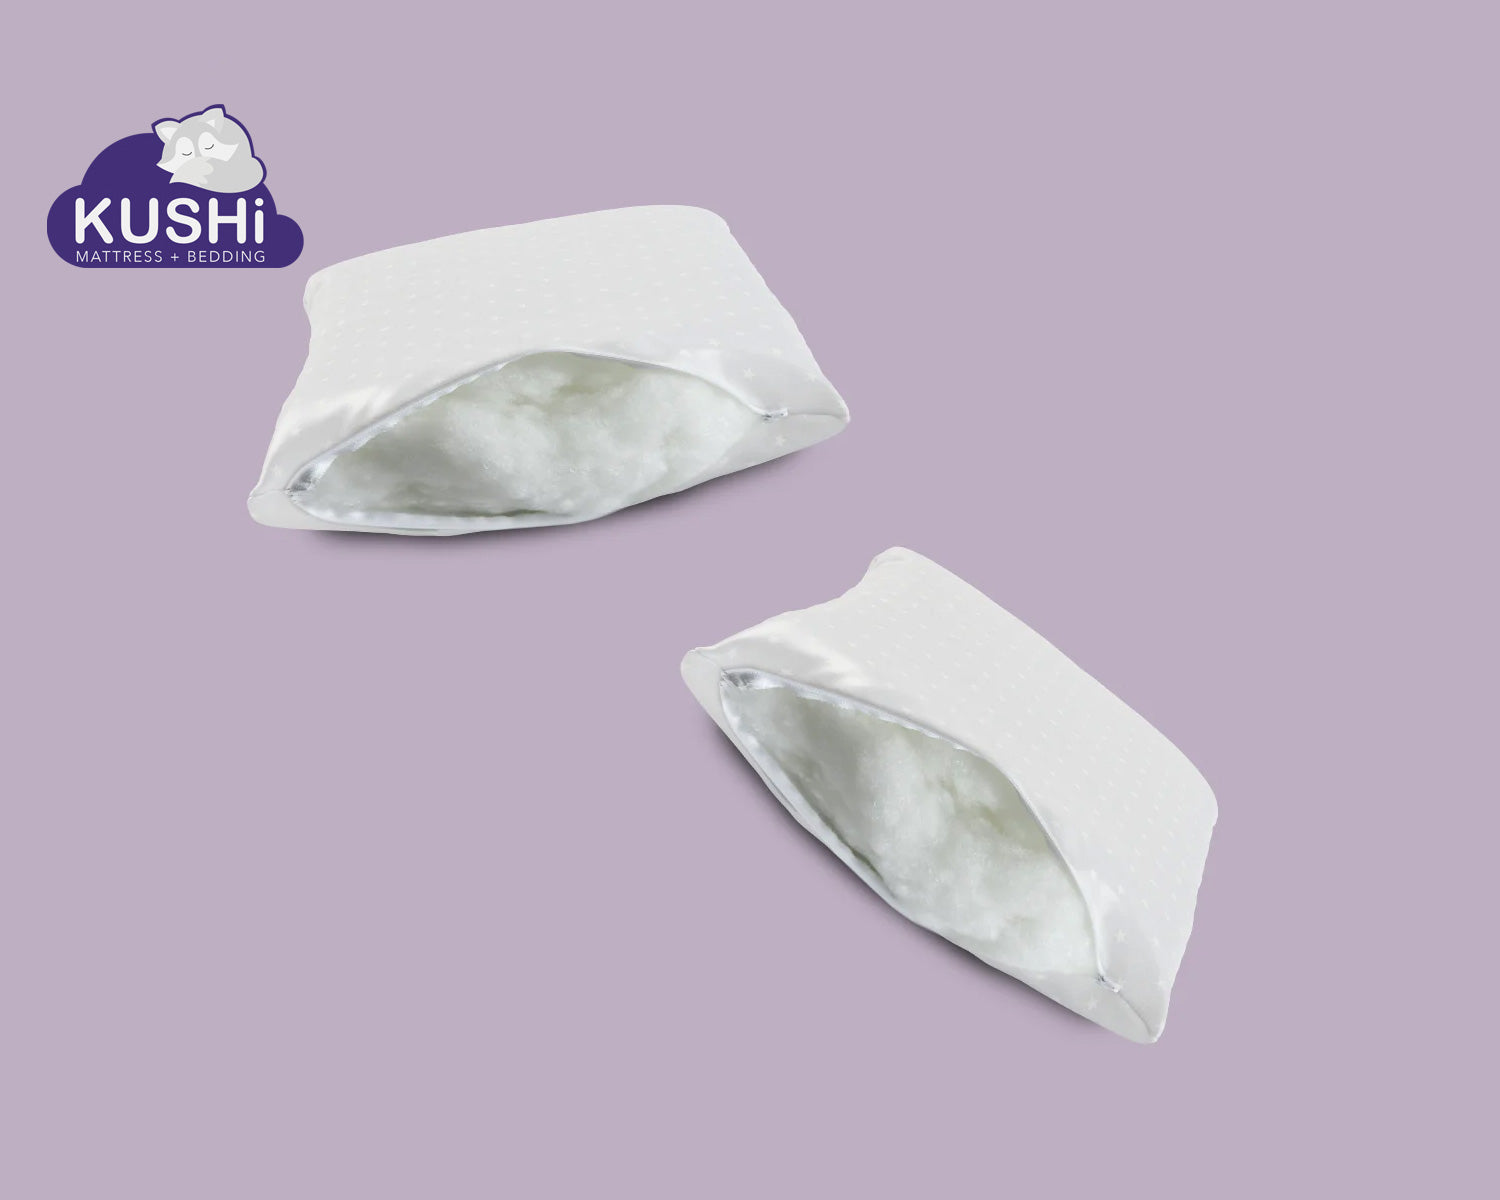 Benefits, Breathability, and Hypoallergenic Properties of Pillows by Kushi Mattress & Bedding